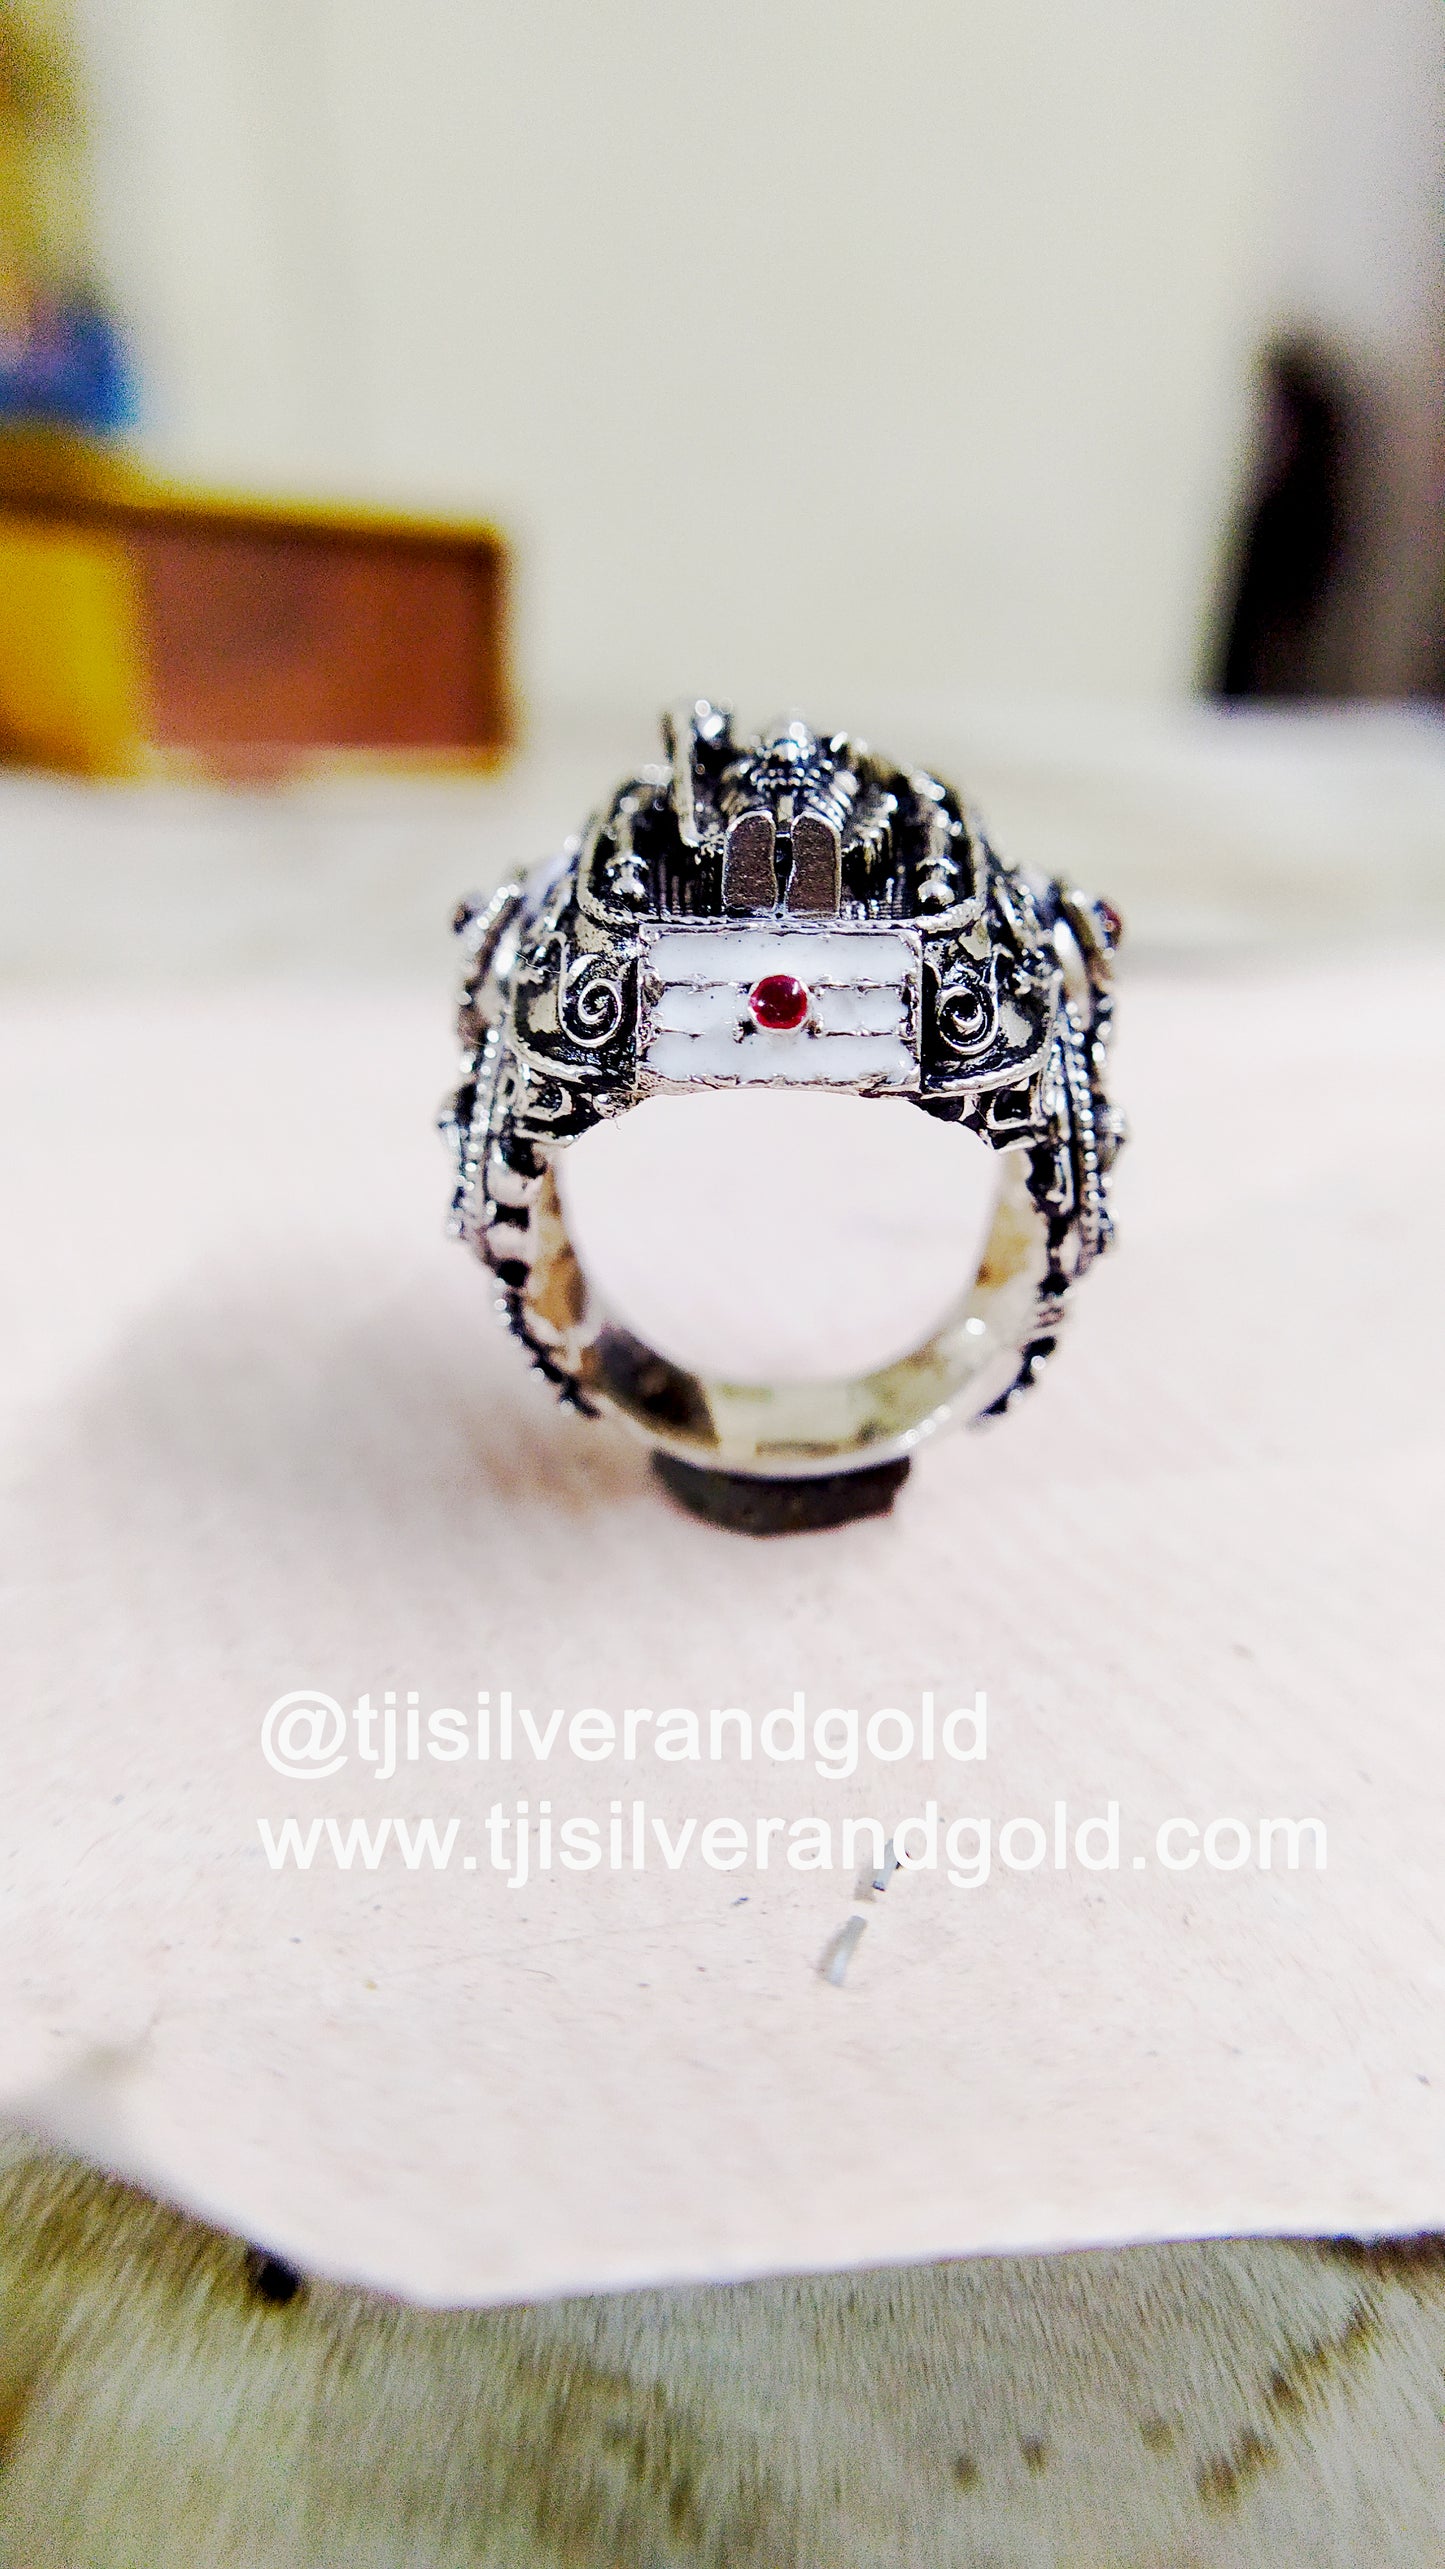 Murugar Ring|MediumSizeSize| with high octane antique finish sterling silver 925 with enamel